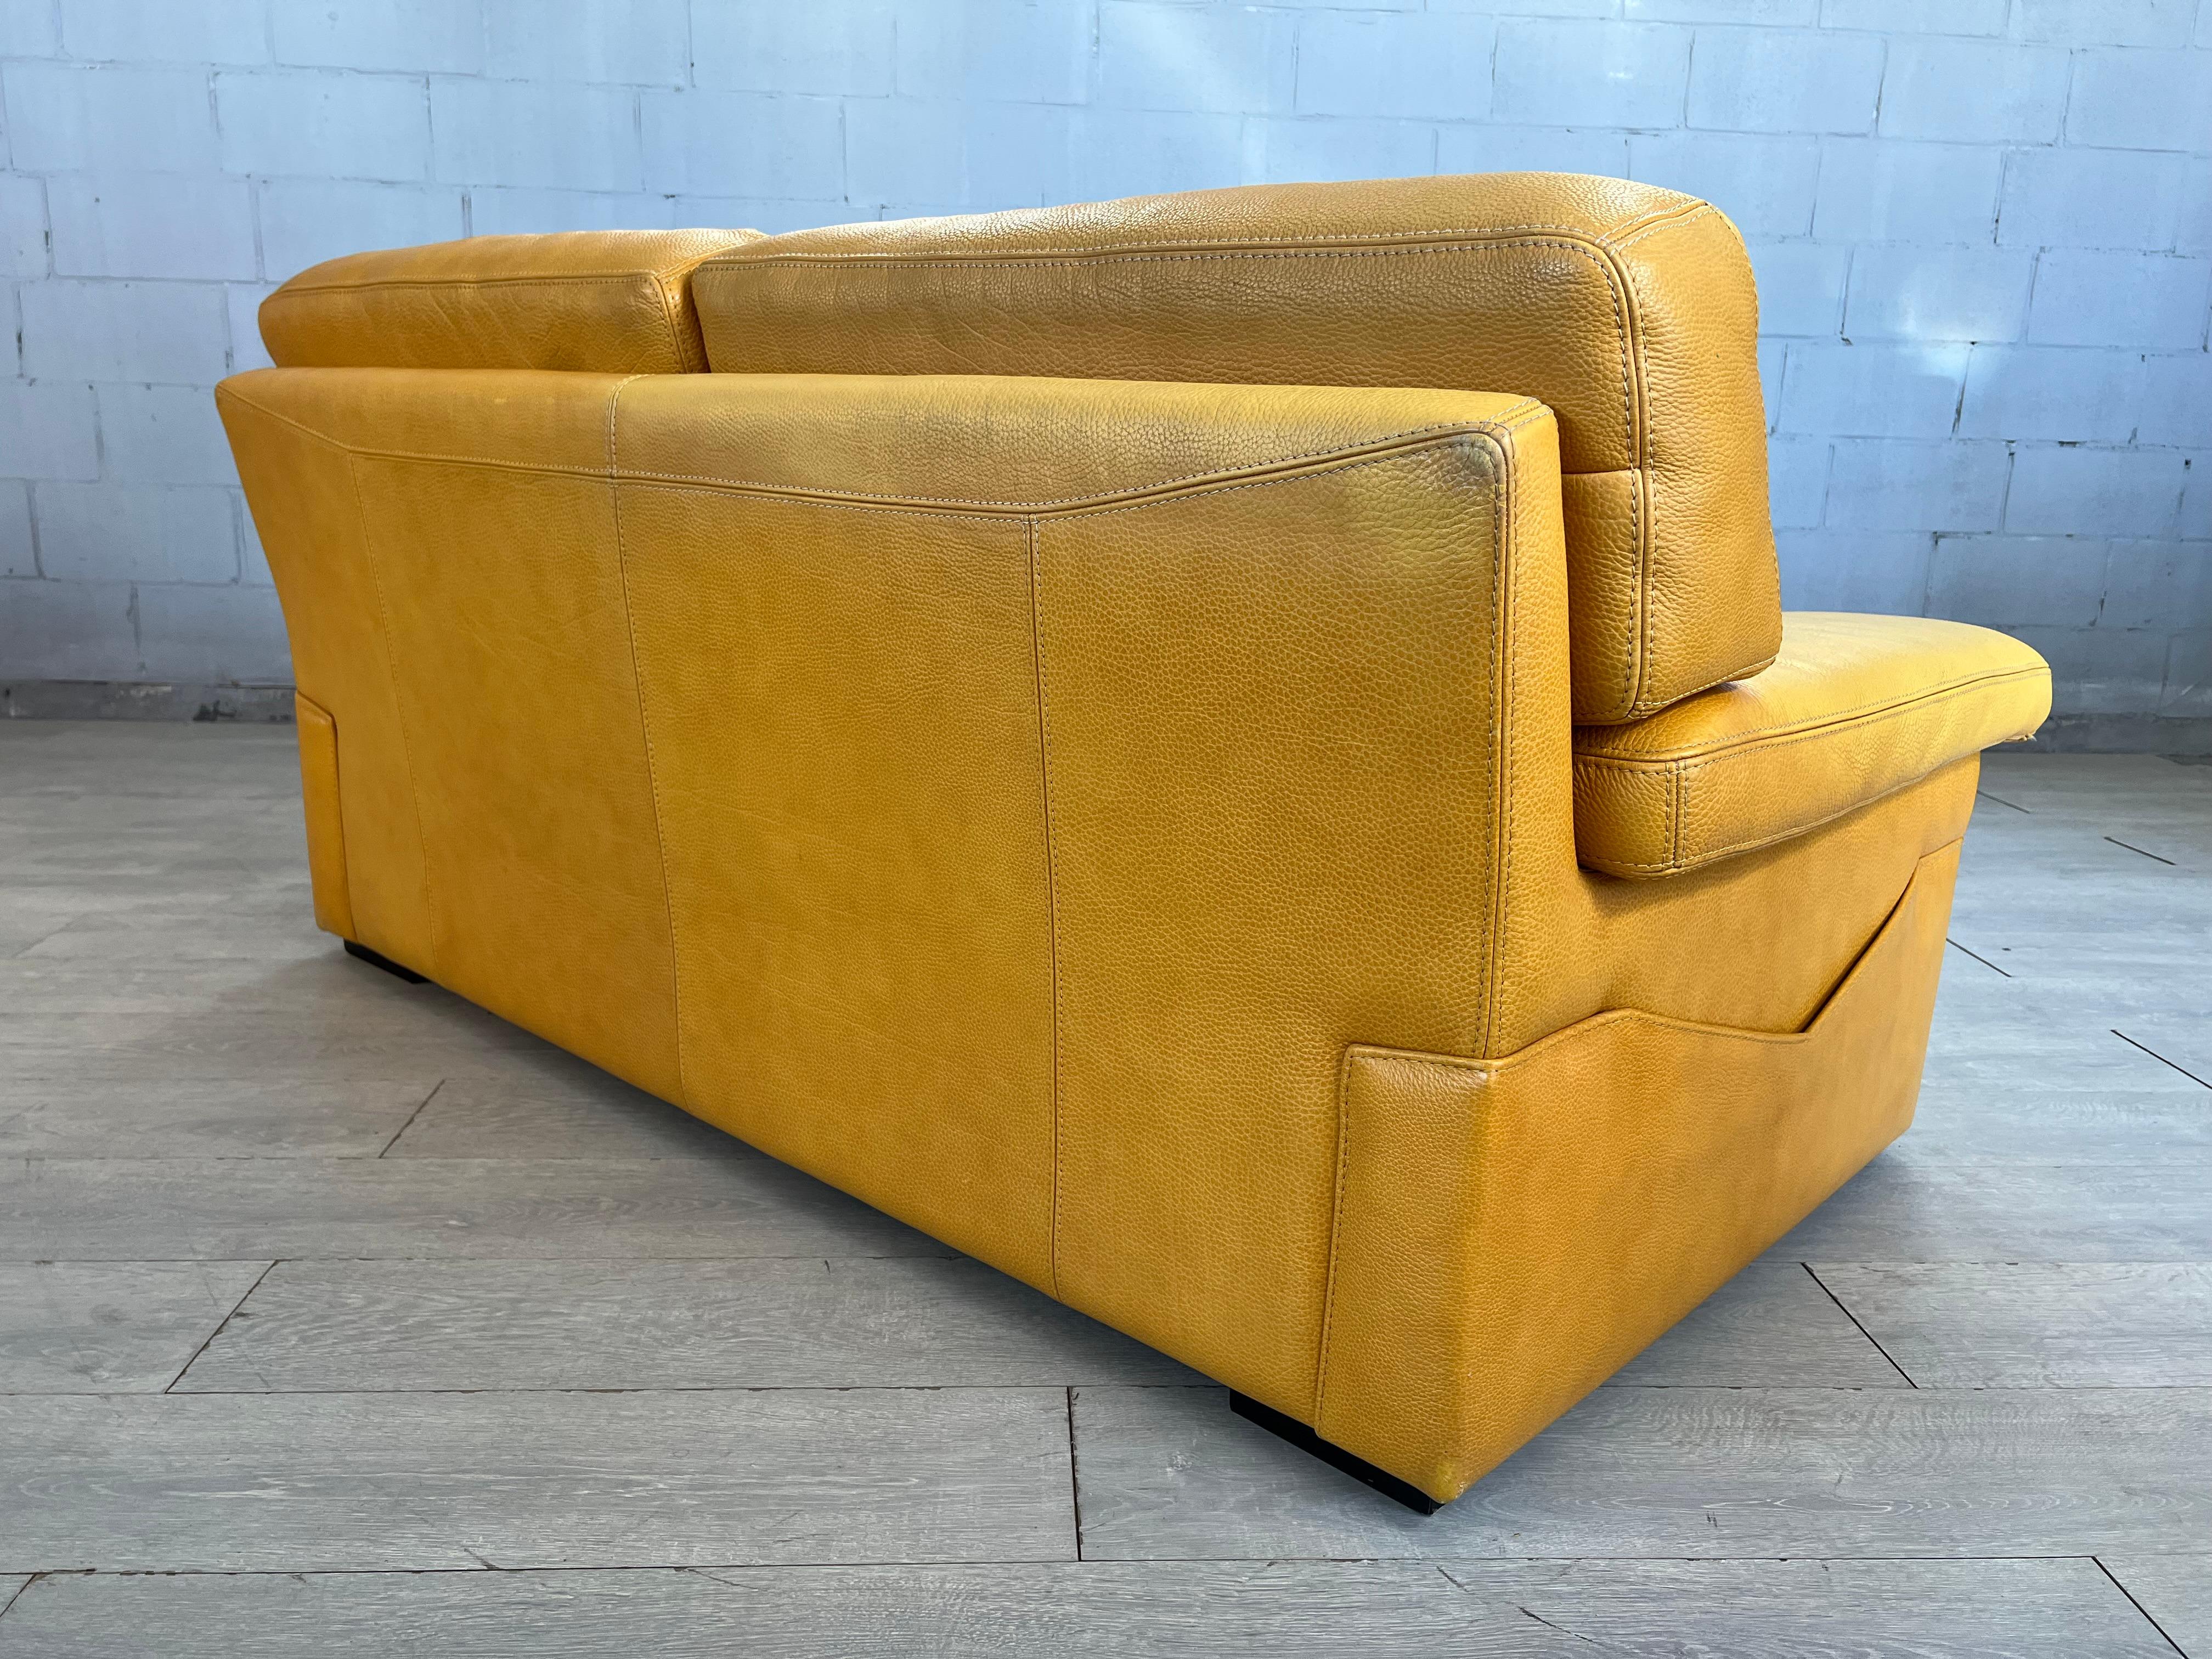 Original Vintage Modern Yellow Leather Sofa Lounger by Roche Bobois, Stamped 3